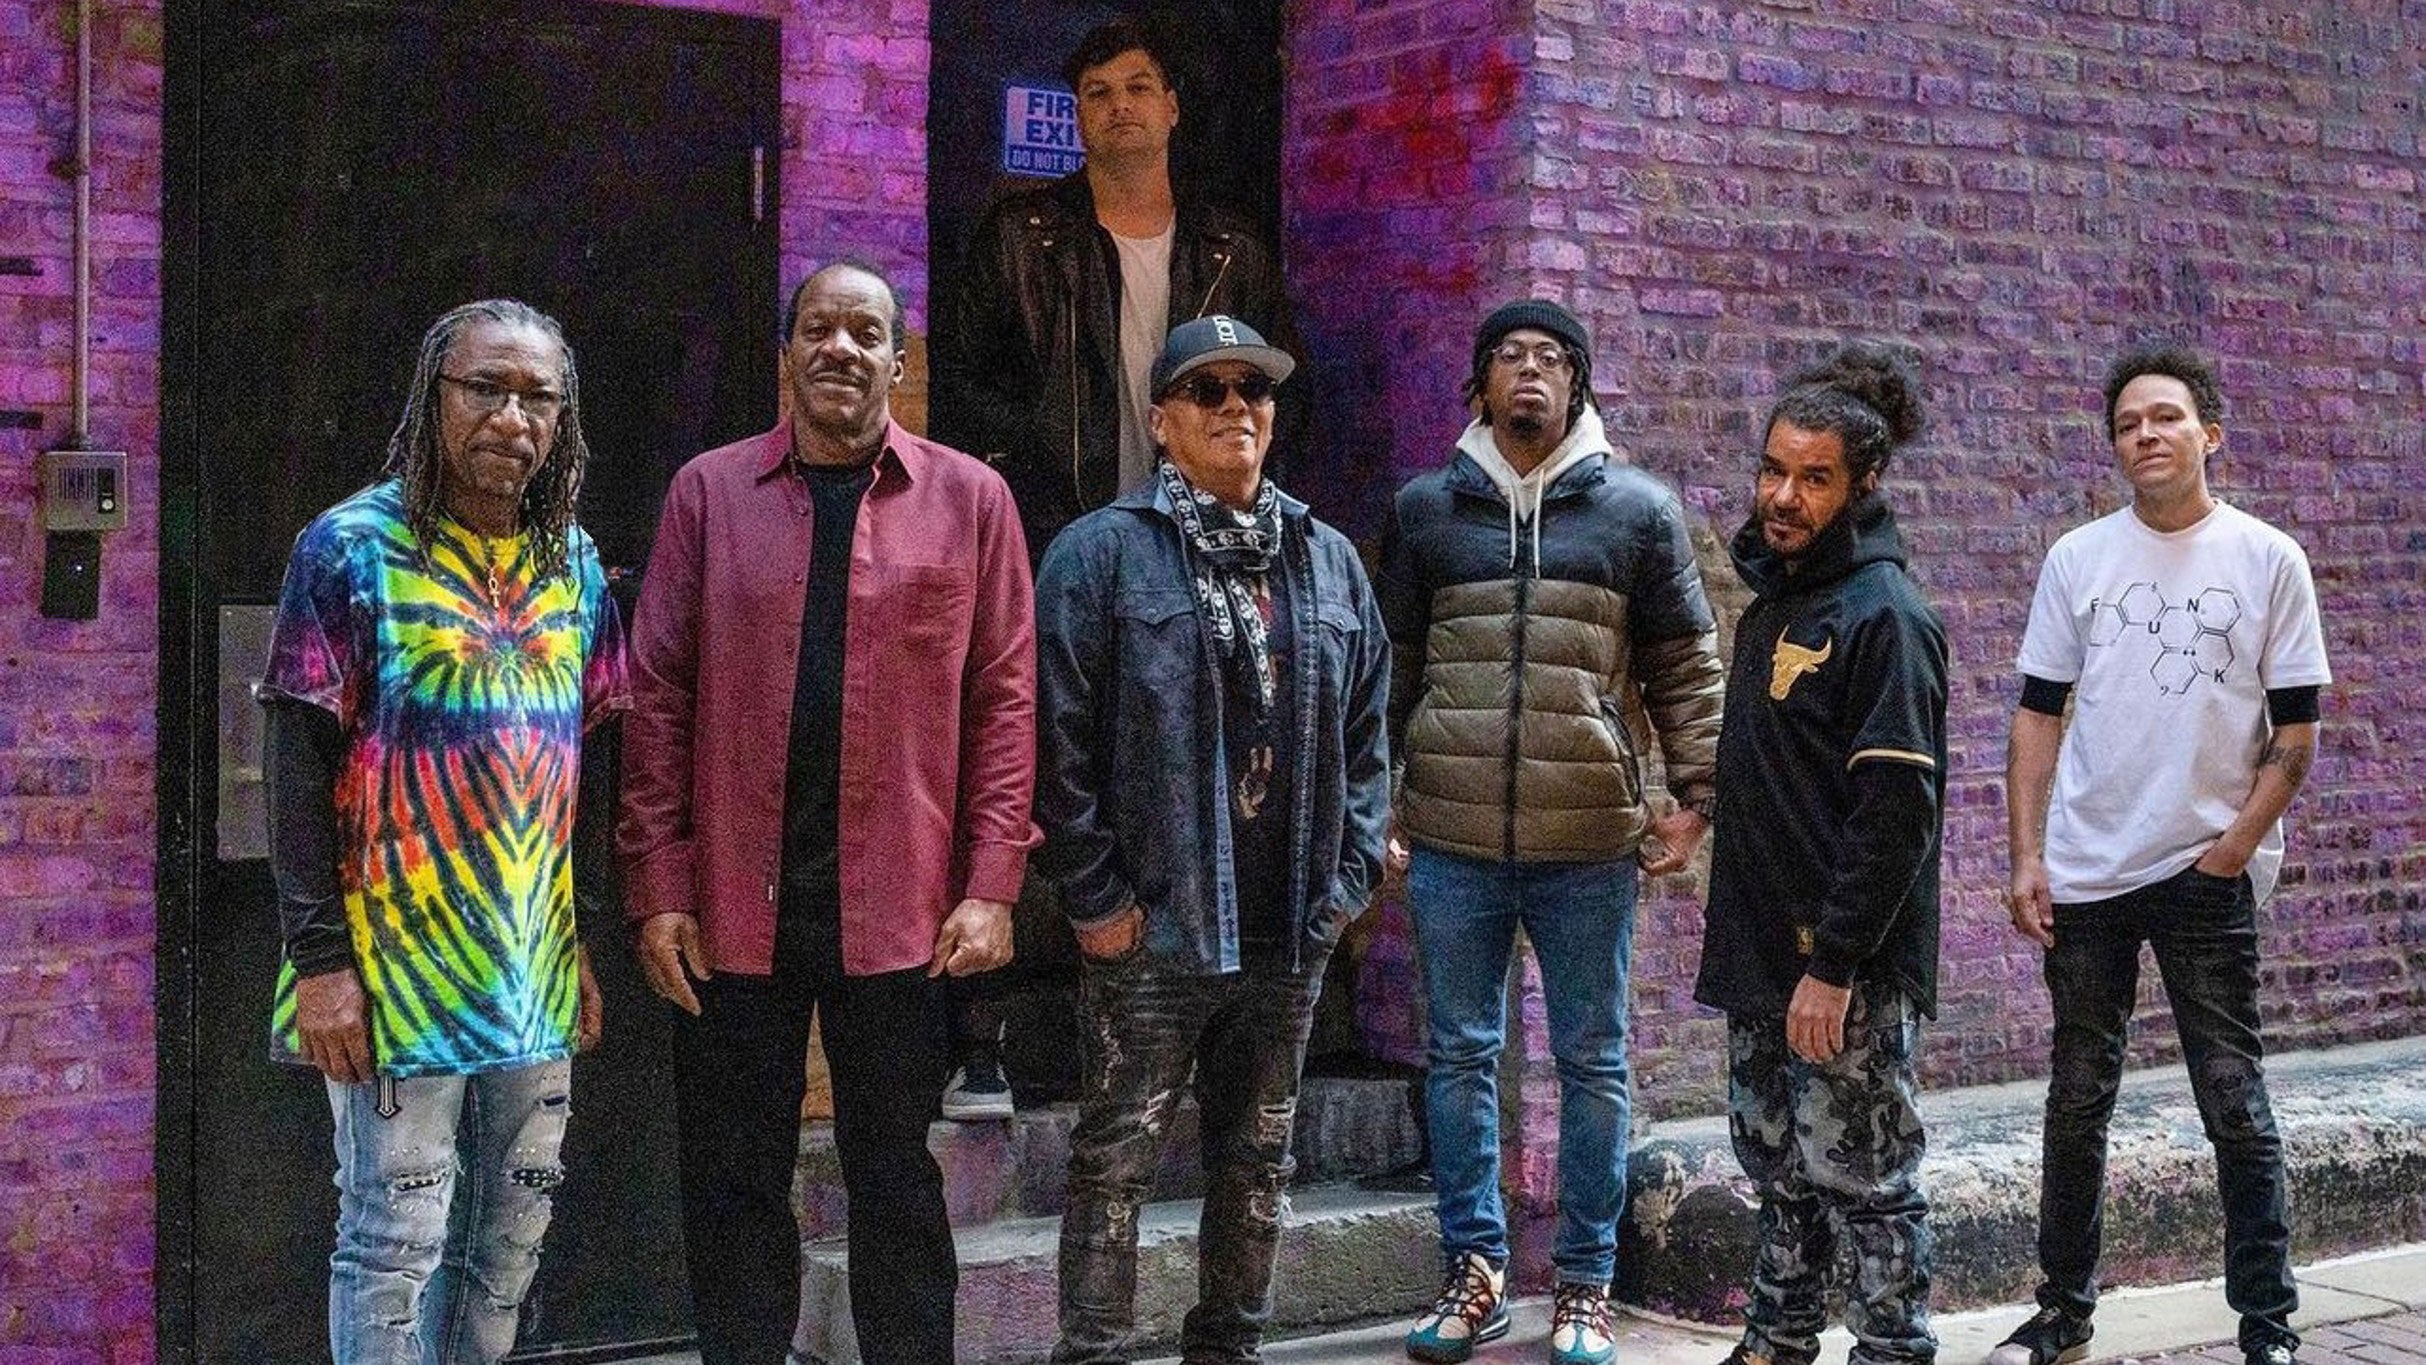 Official Tedeschi Trucks Band After Party featuring Dumpstaphunk in Atlantic City promo photo for Hard Rock Venue presale offer code